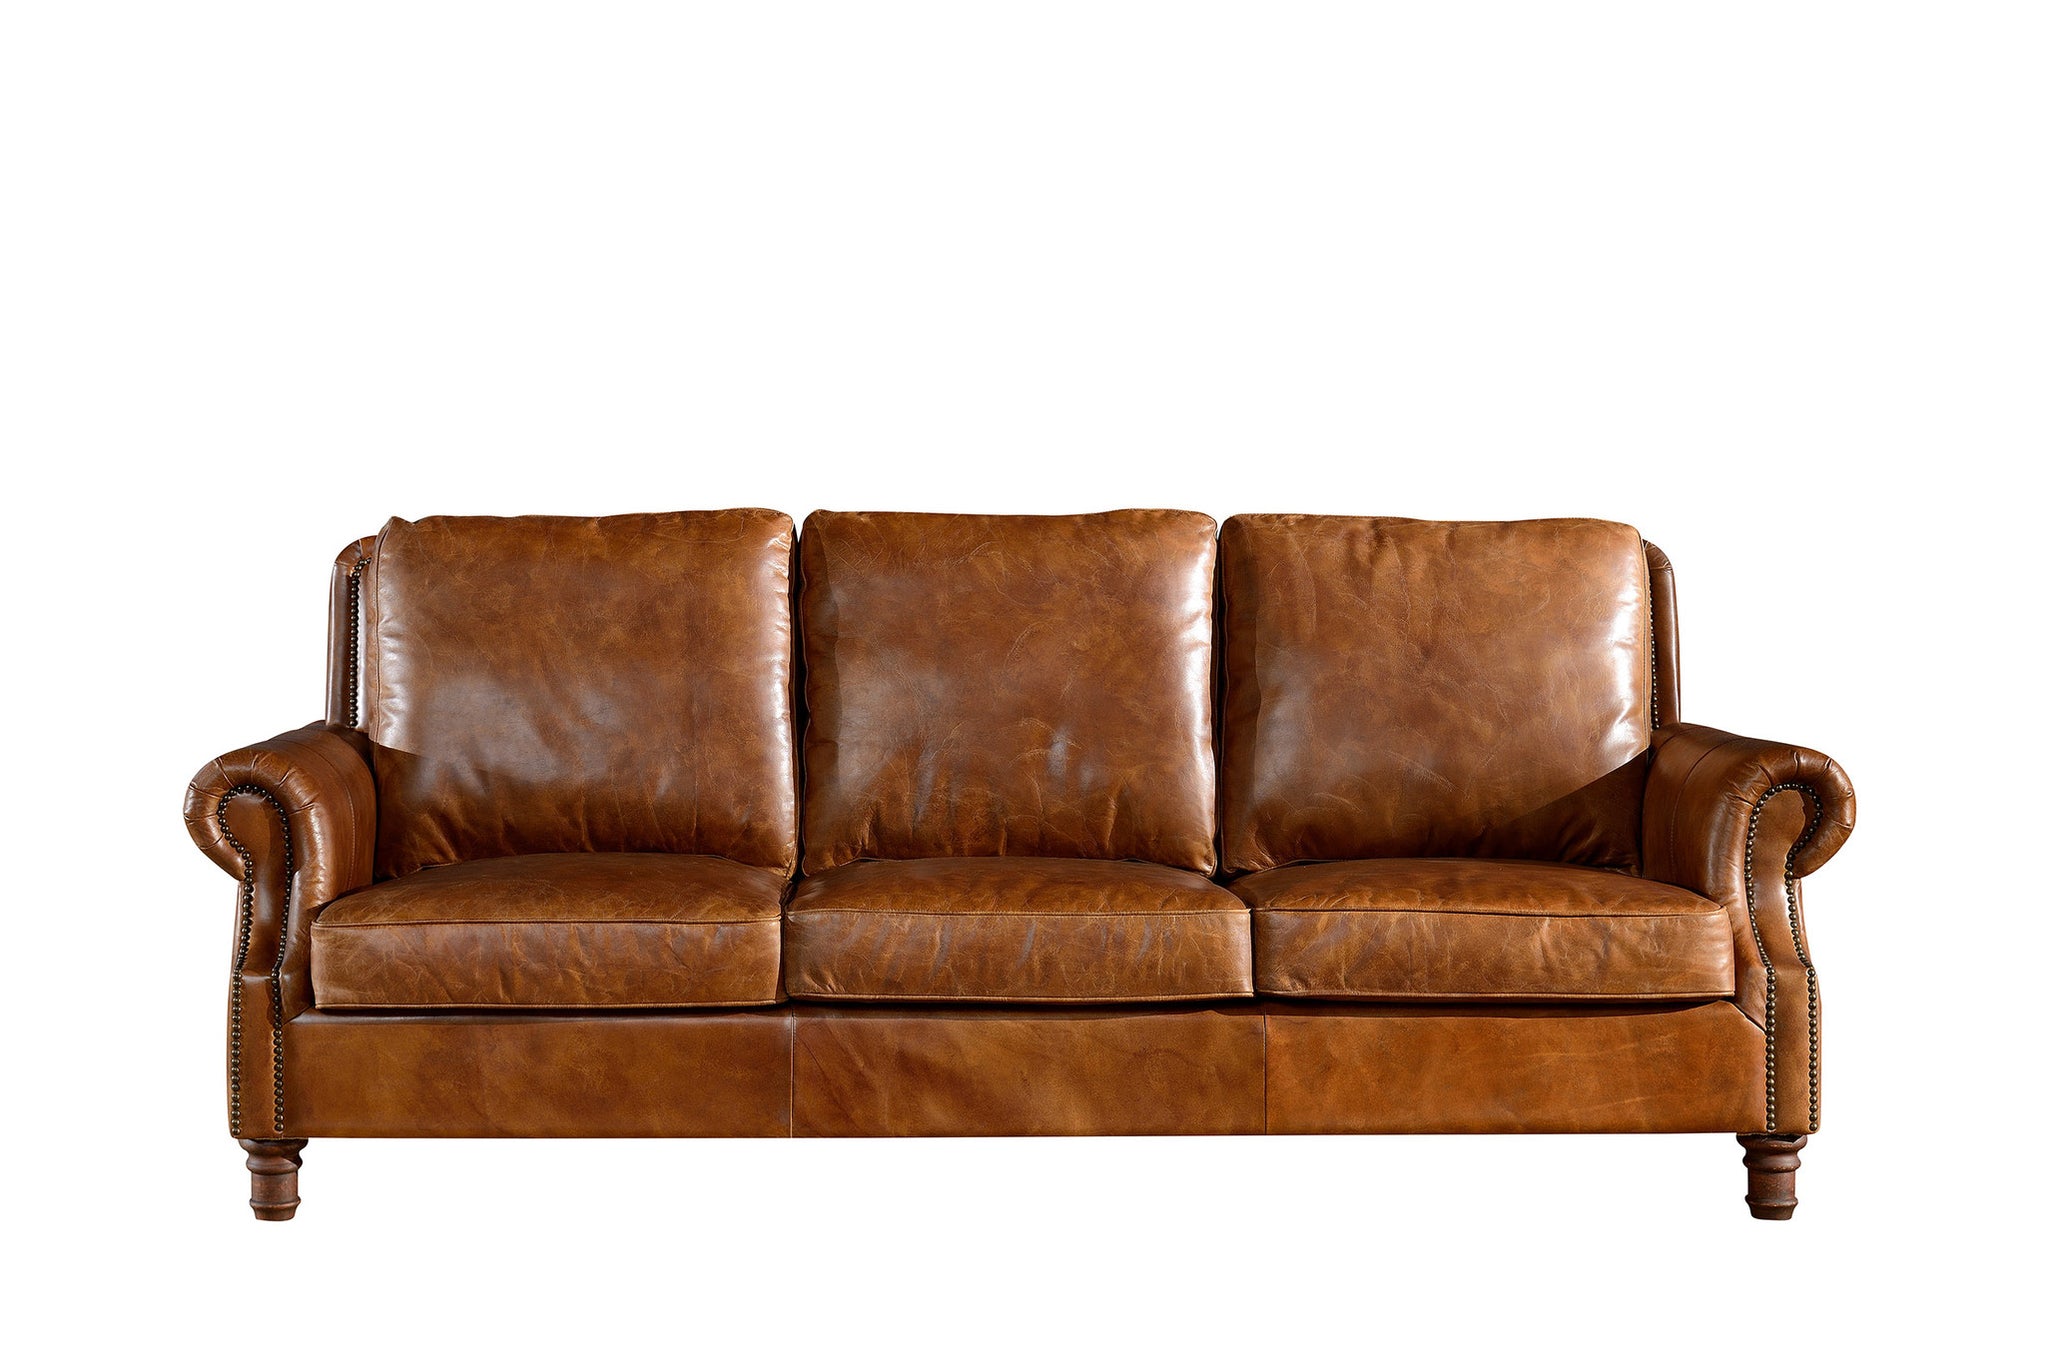 english rolled arm leather sofa